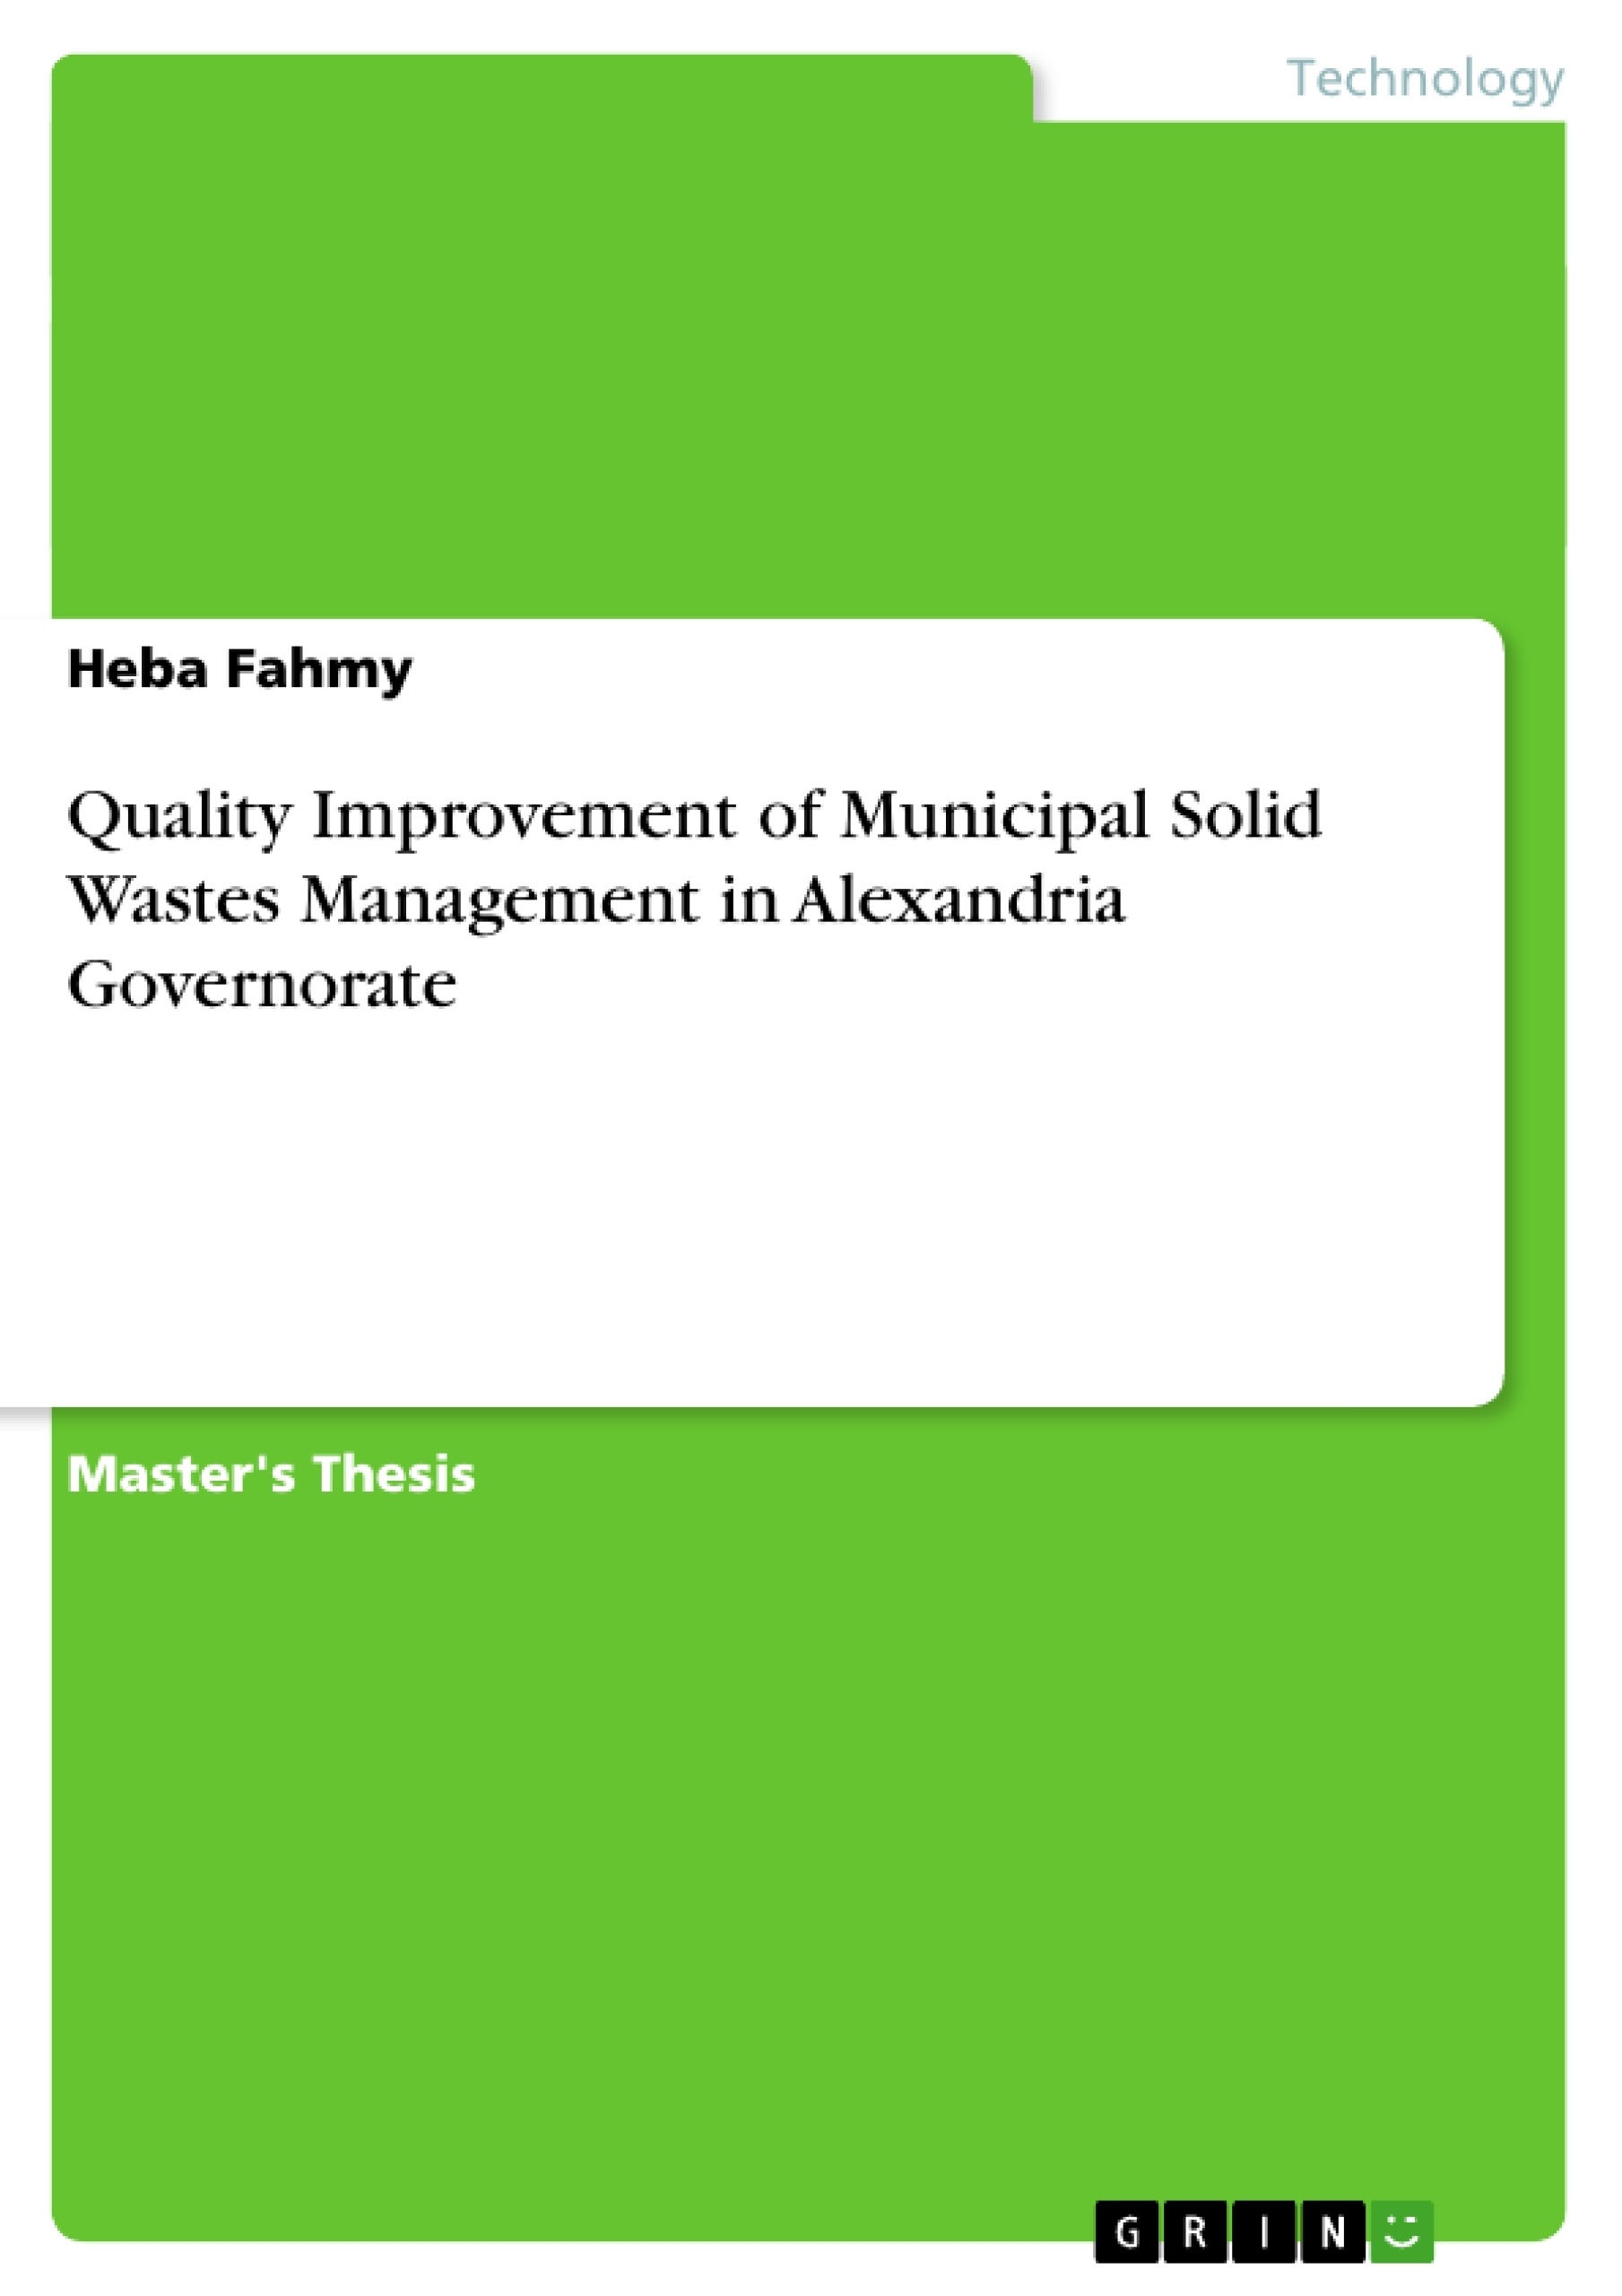 Title: Quality Improvement of Municipal Solid Wastes Management in Alexandria Governorate